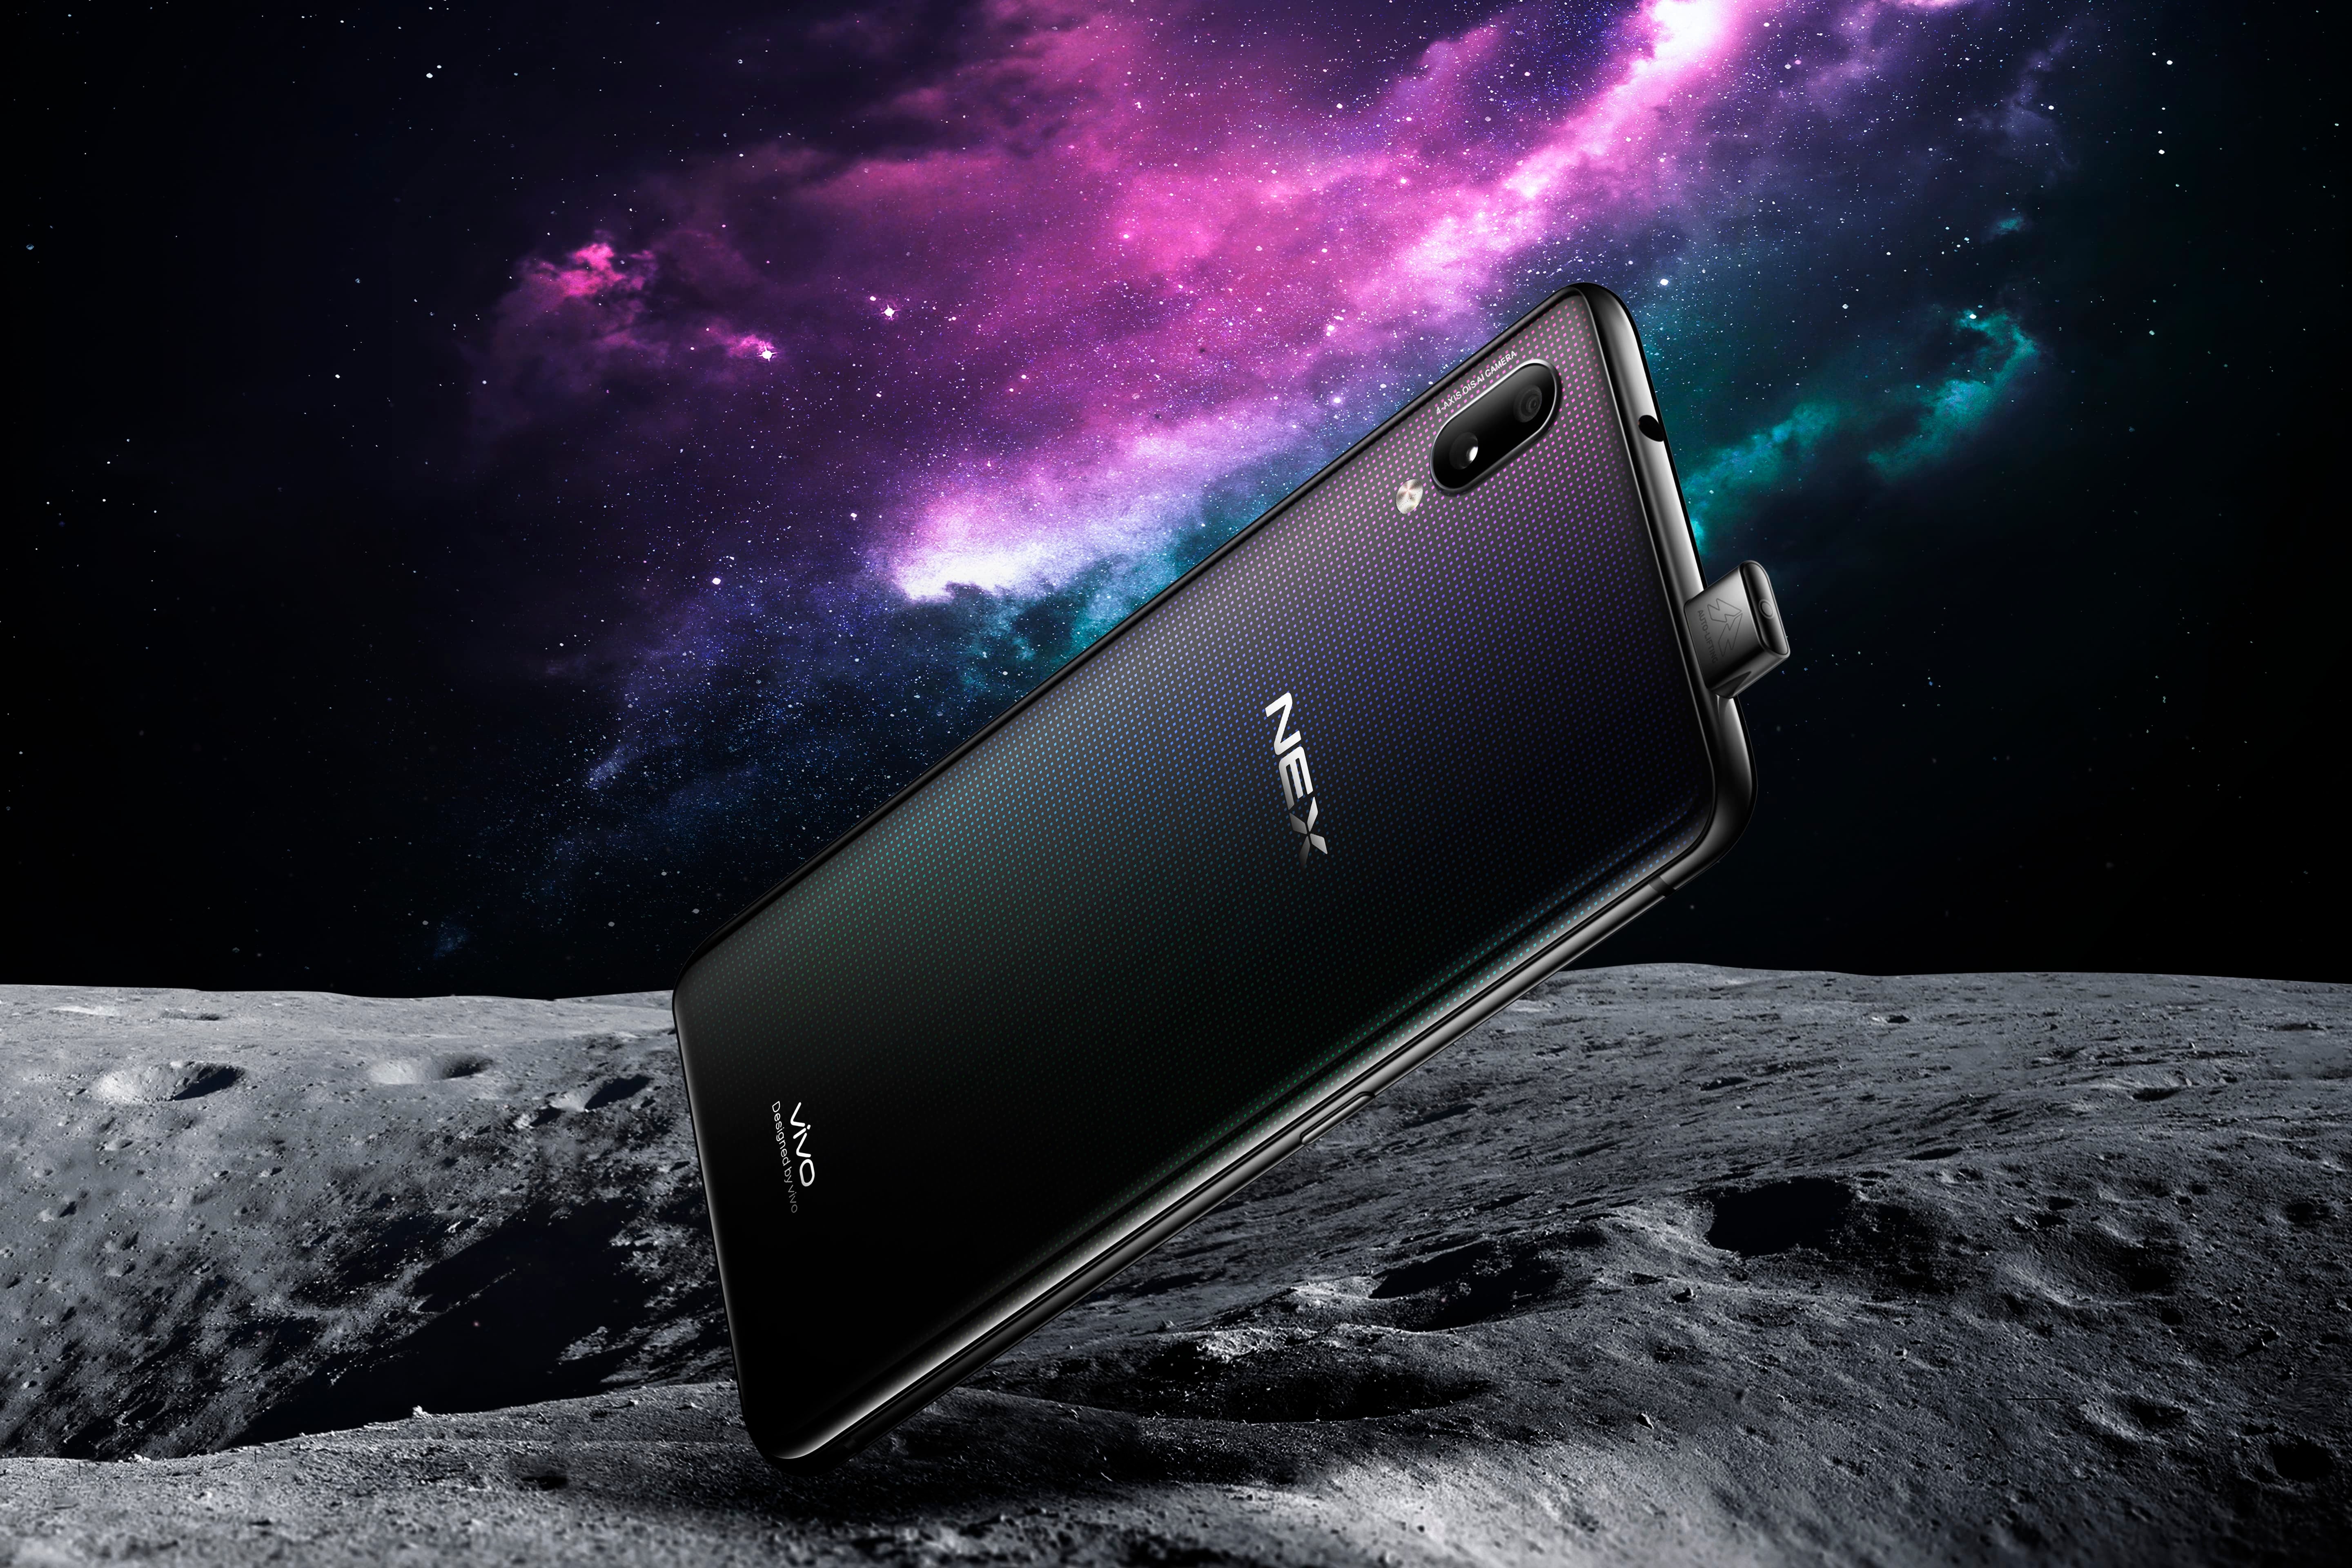 The most bezel-less phone in the world goes official: Manufacturers, take notes from the Vivo NEX